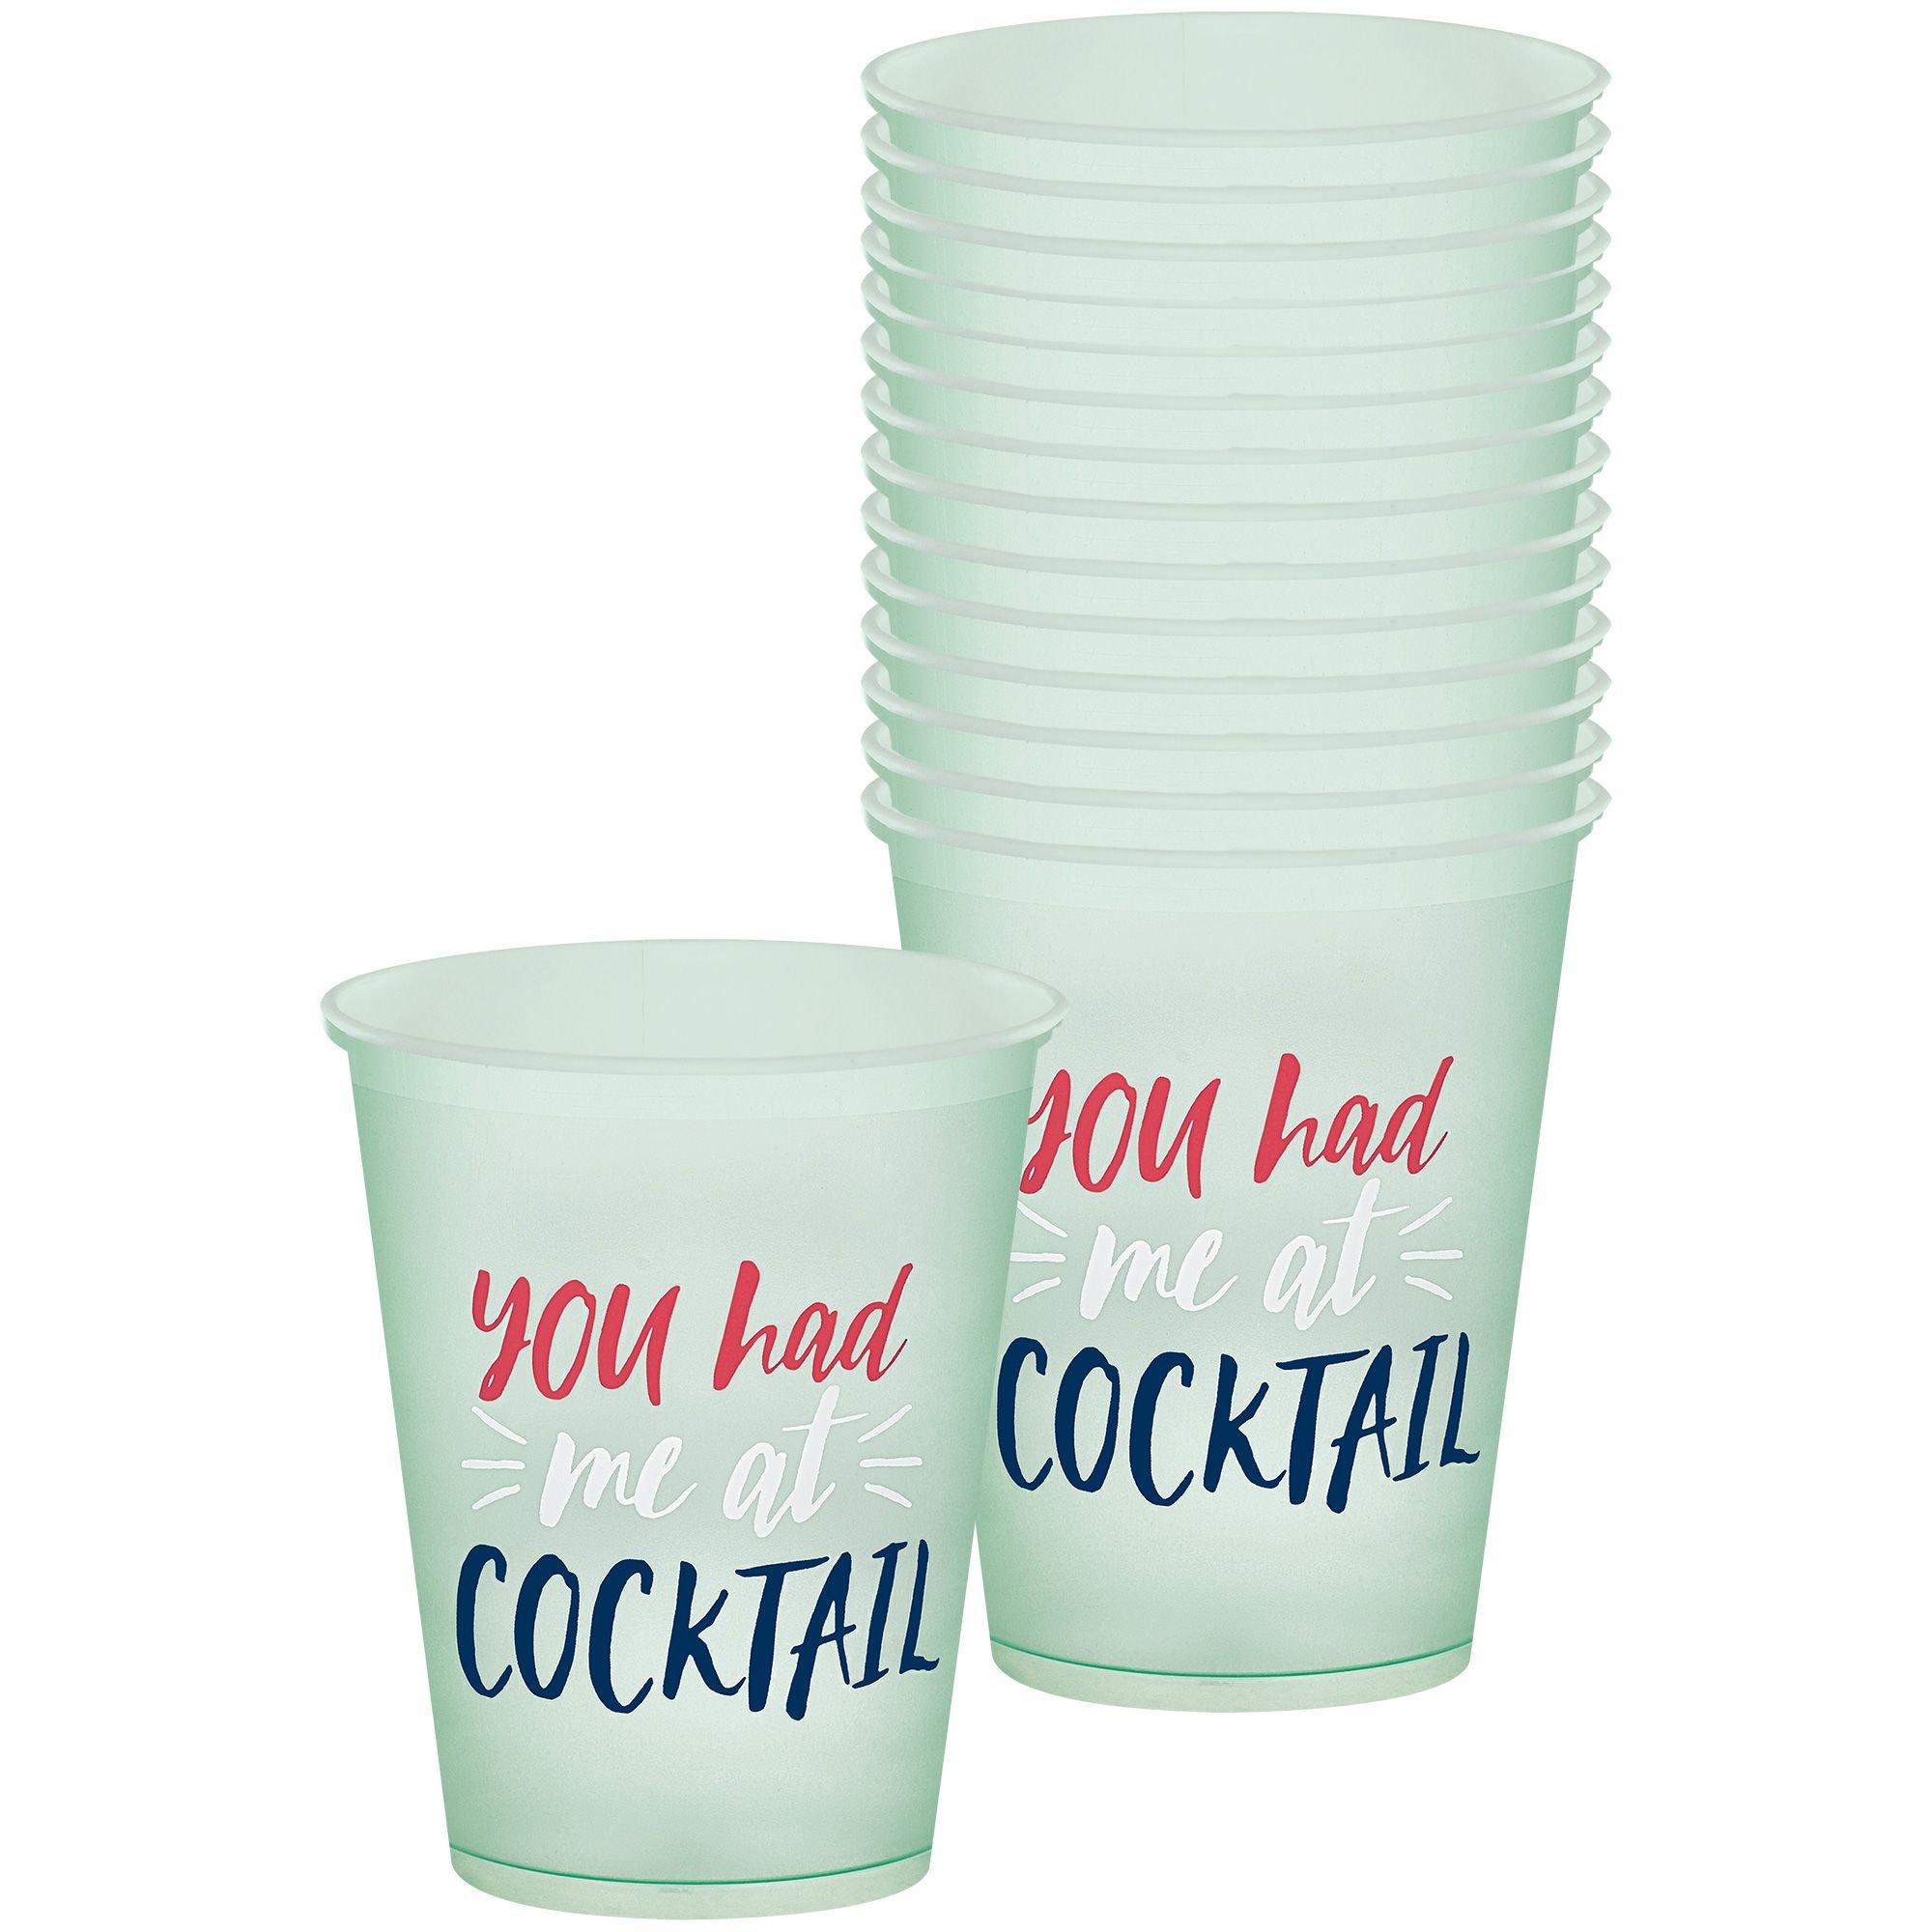 Dinks and Drinks Champagne Pickleball Frosted Cups- Pack of 10 $28.00